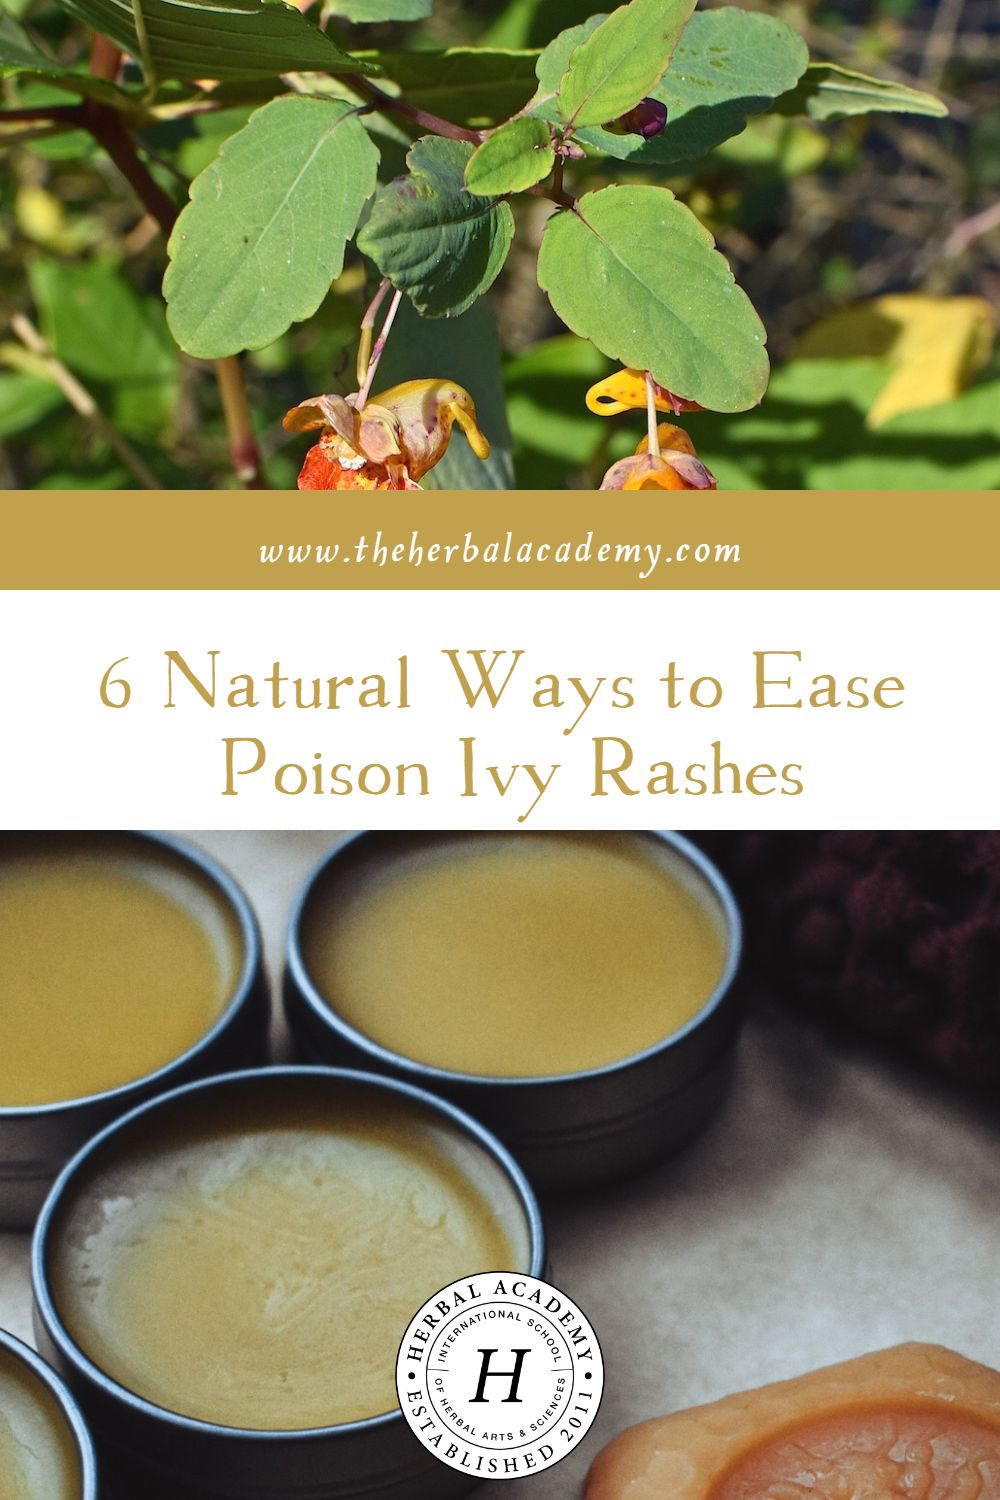 6 Natural Ways to Ease Poison Ivy Rashes | Herbal Academy | There are many natural ways to ease poison ivy rashes! Try a poultice – both jewelweed and plantain are great options!